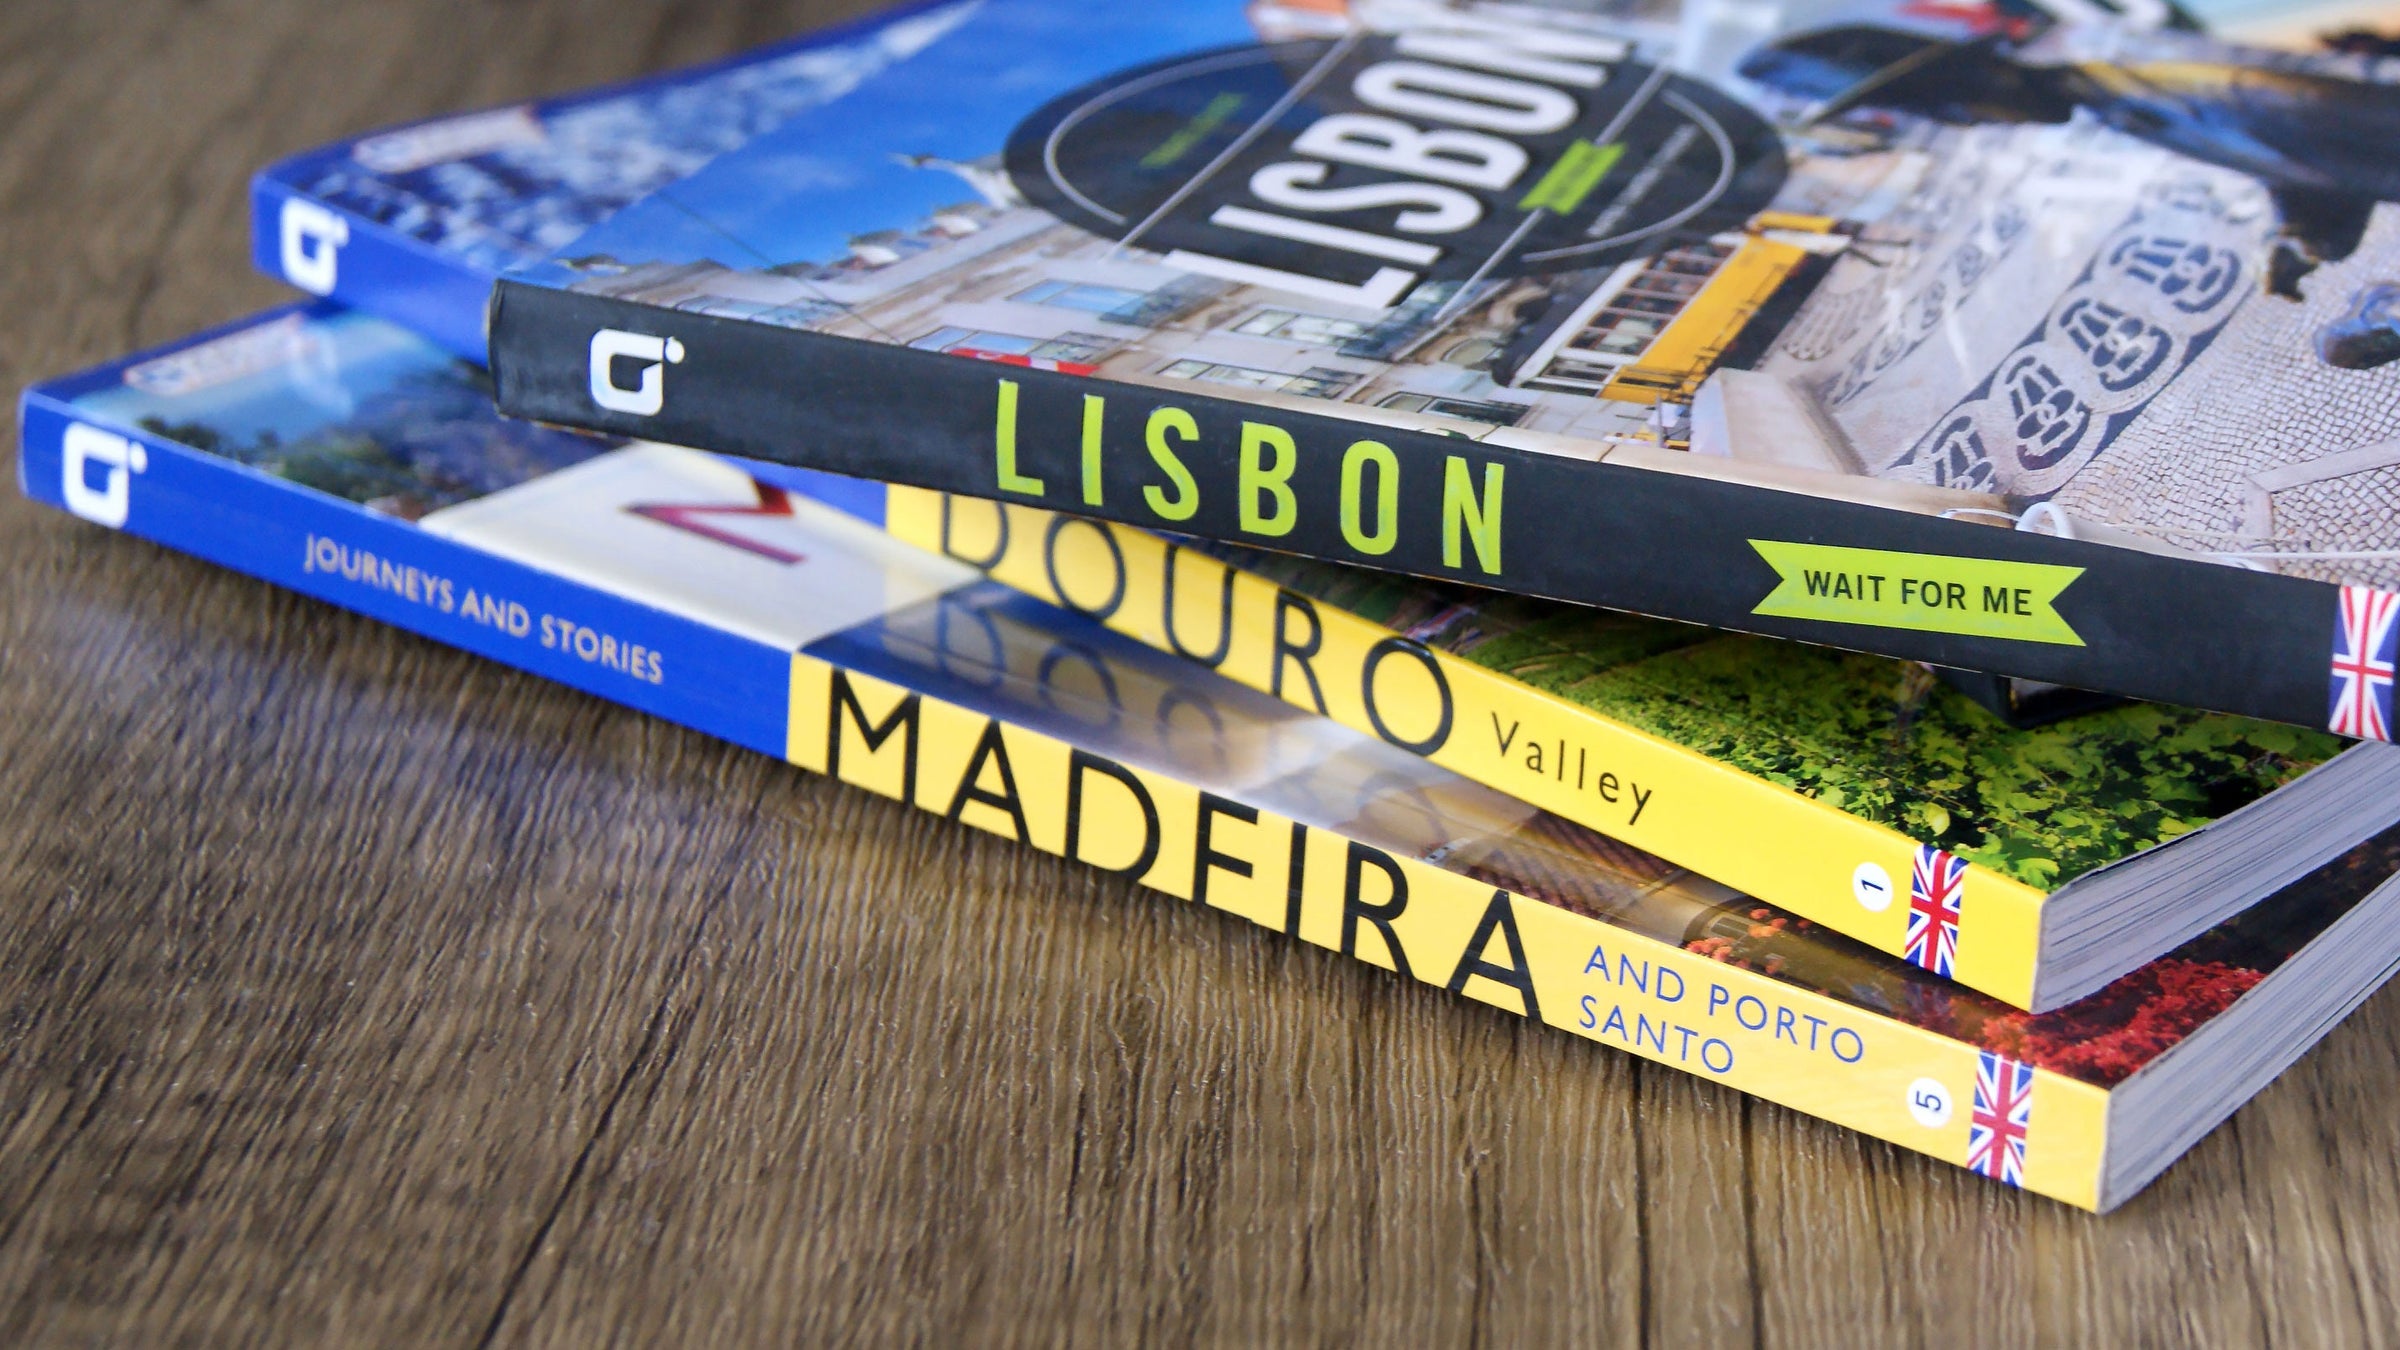 Portuguese Travel Guides translated to english.